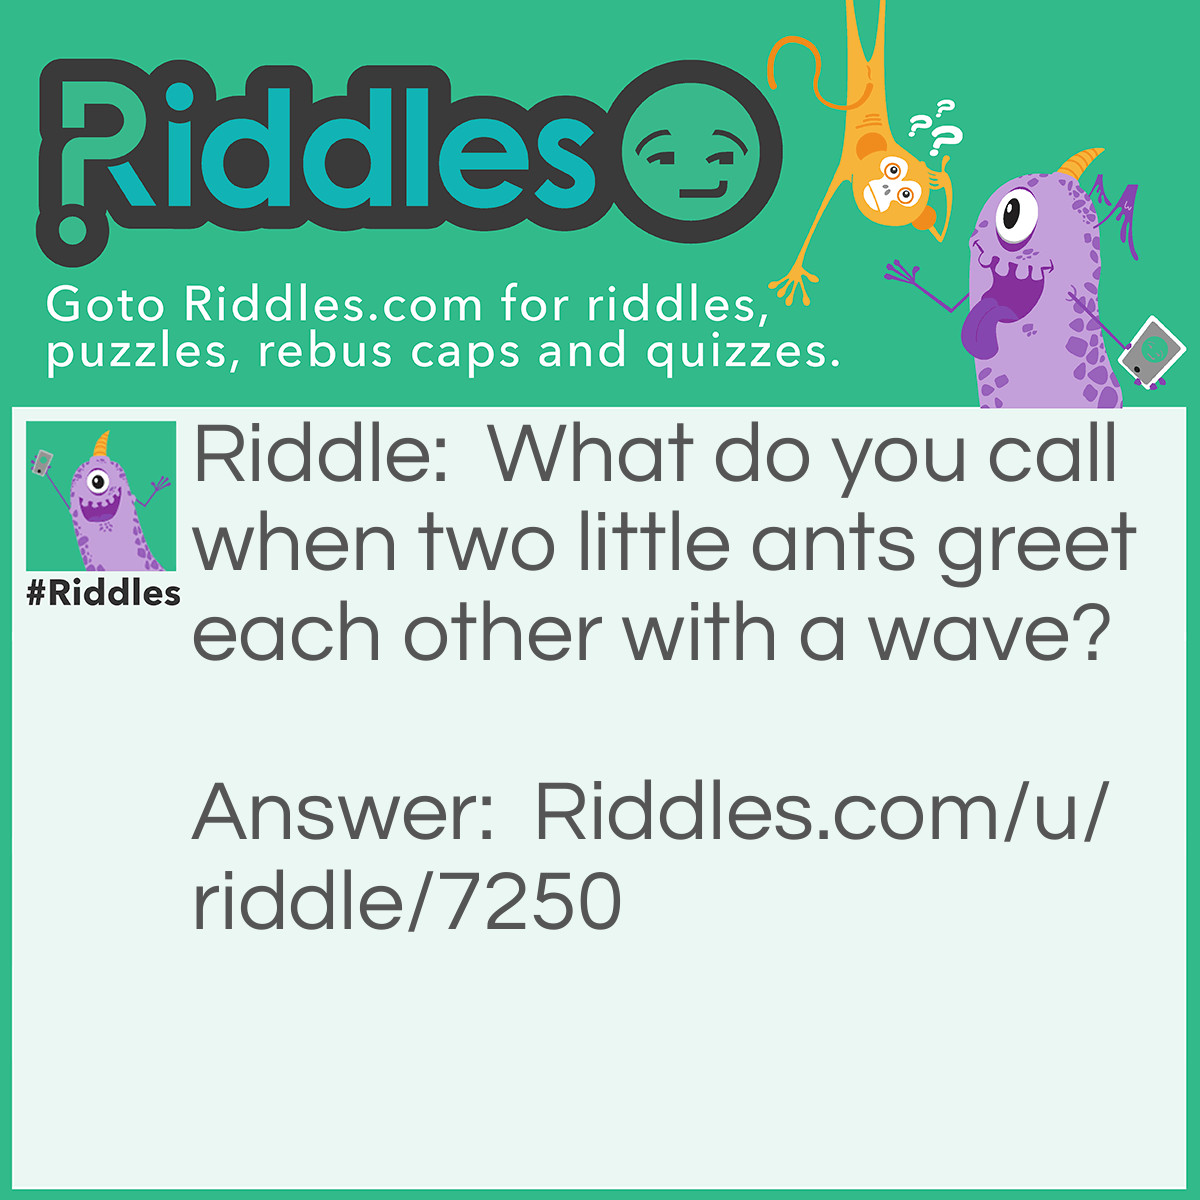 Riddle: What do you call when two little ants greet each other with a wave? Answer: Micro-wave!